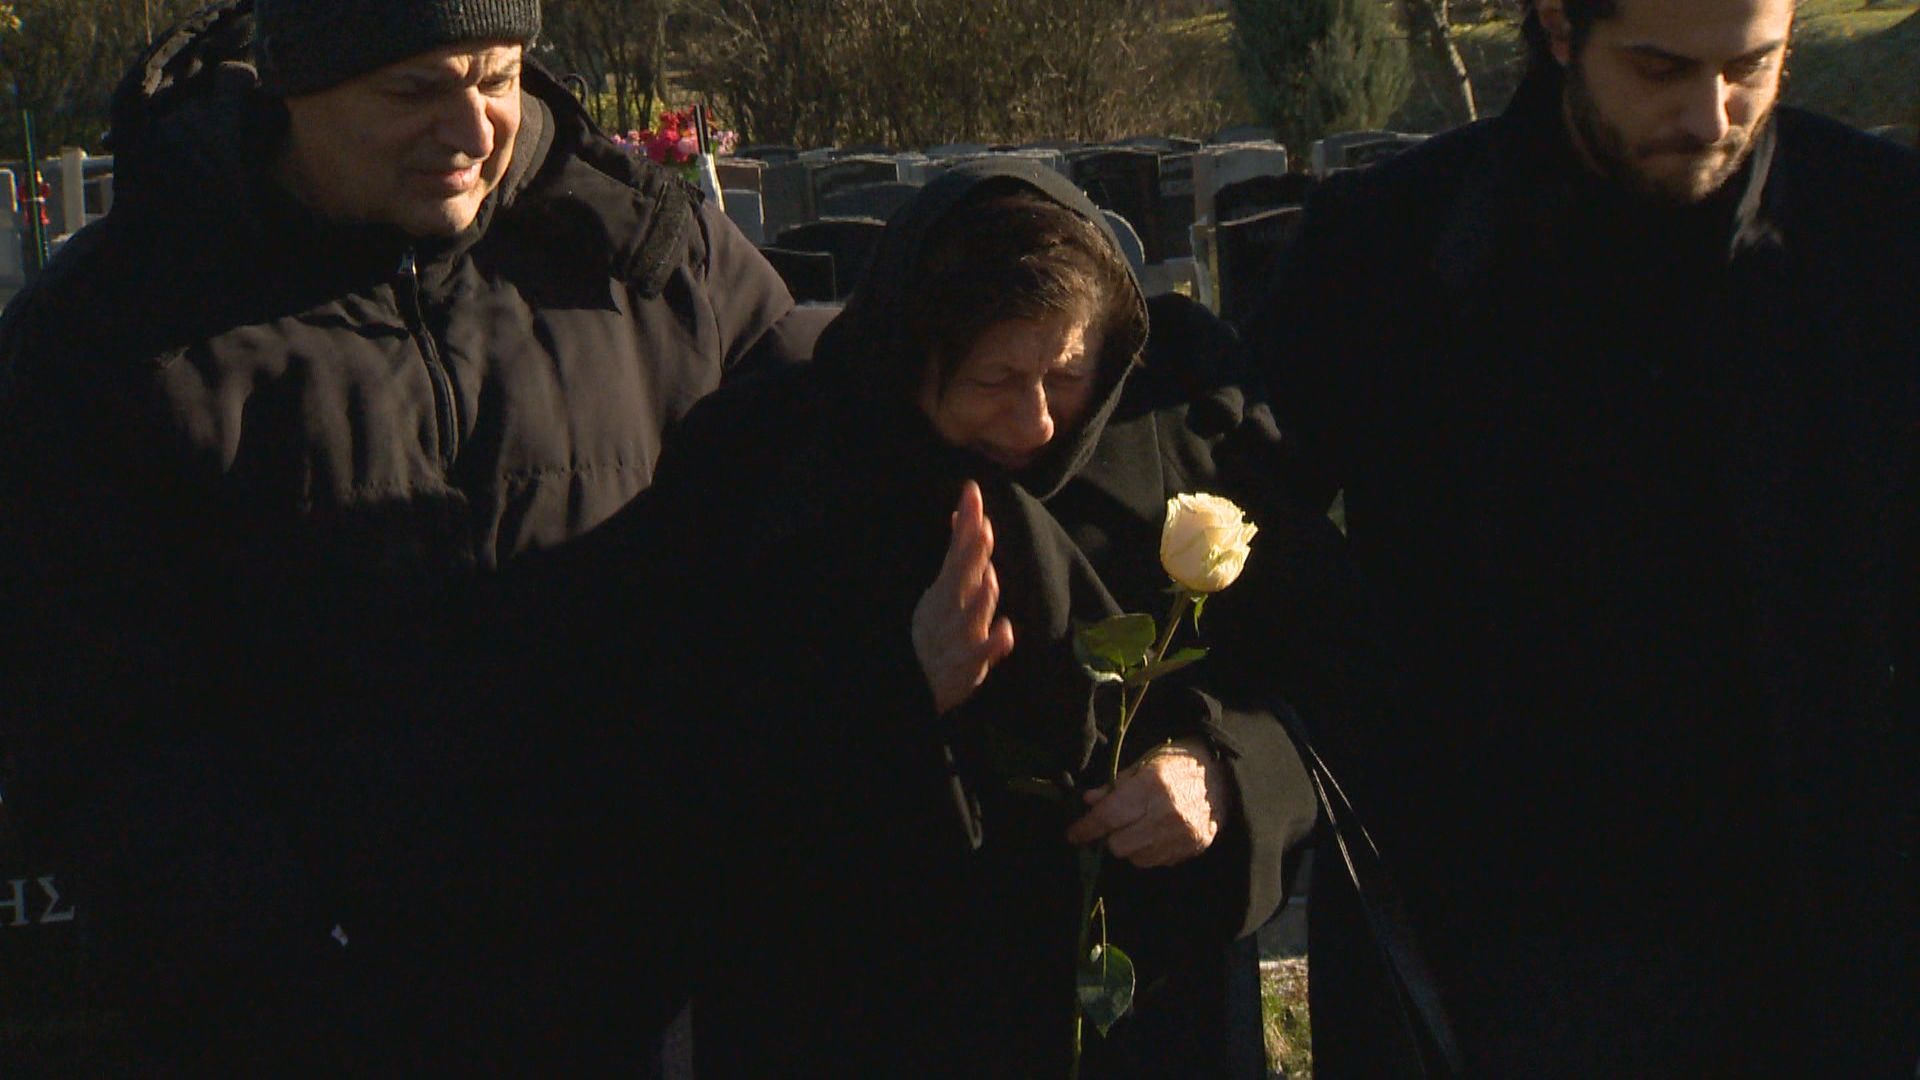 Family celebrates funeral months after loved one’s passing due to cemetery labour dispute